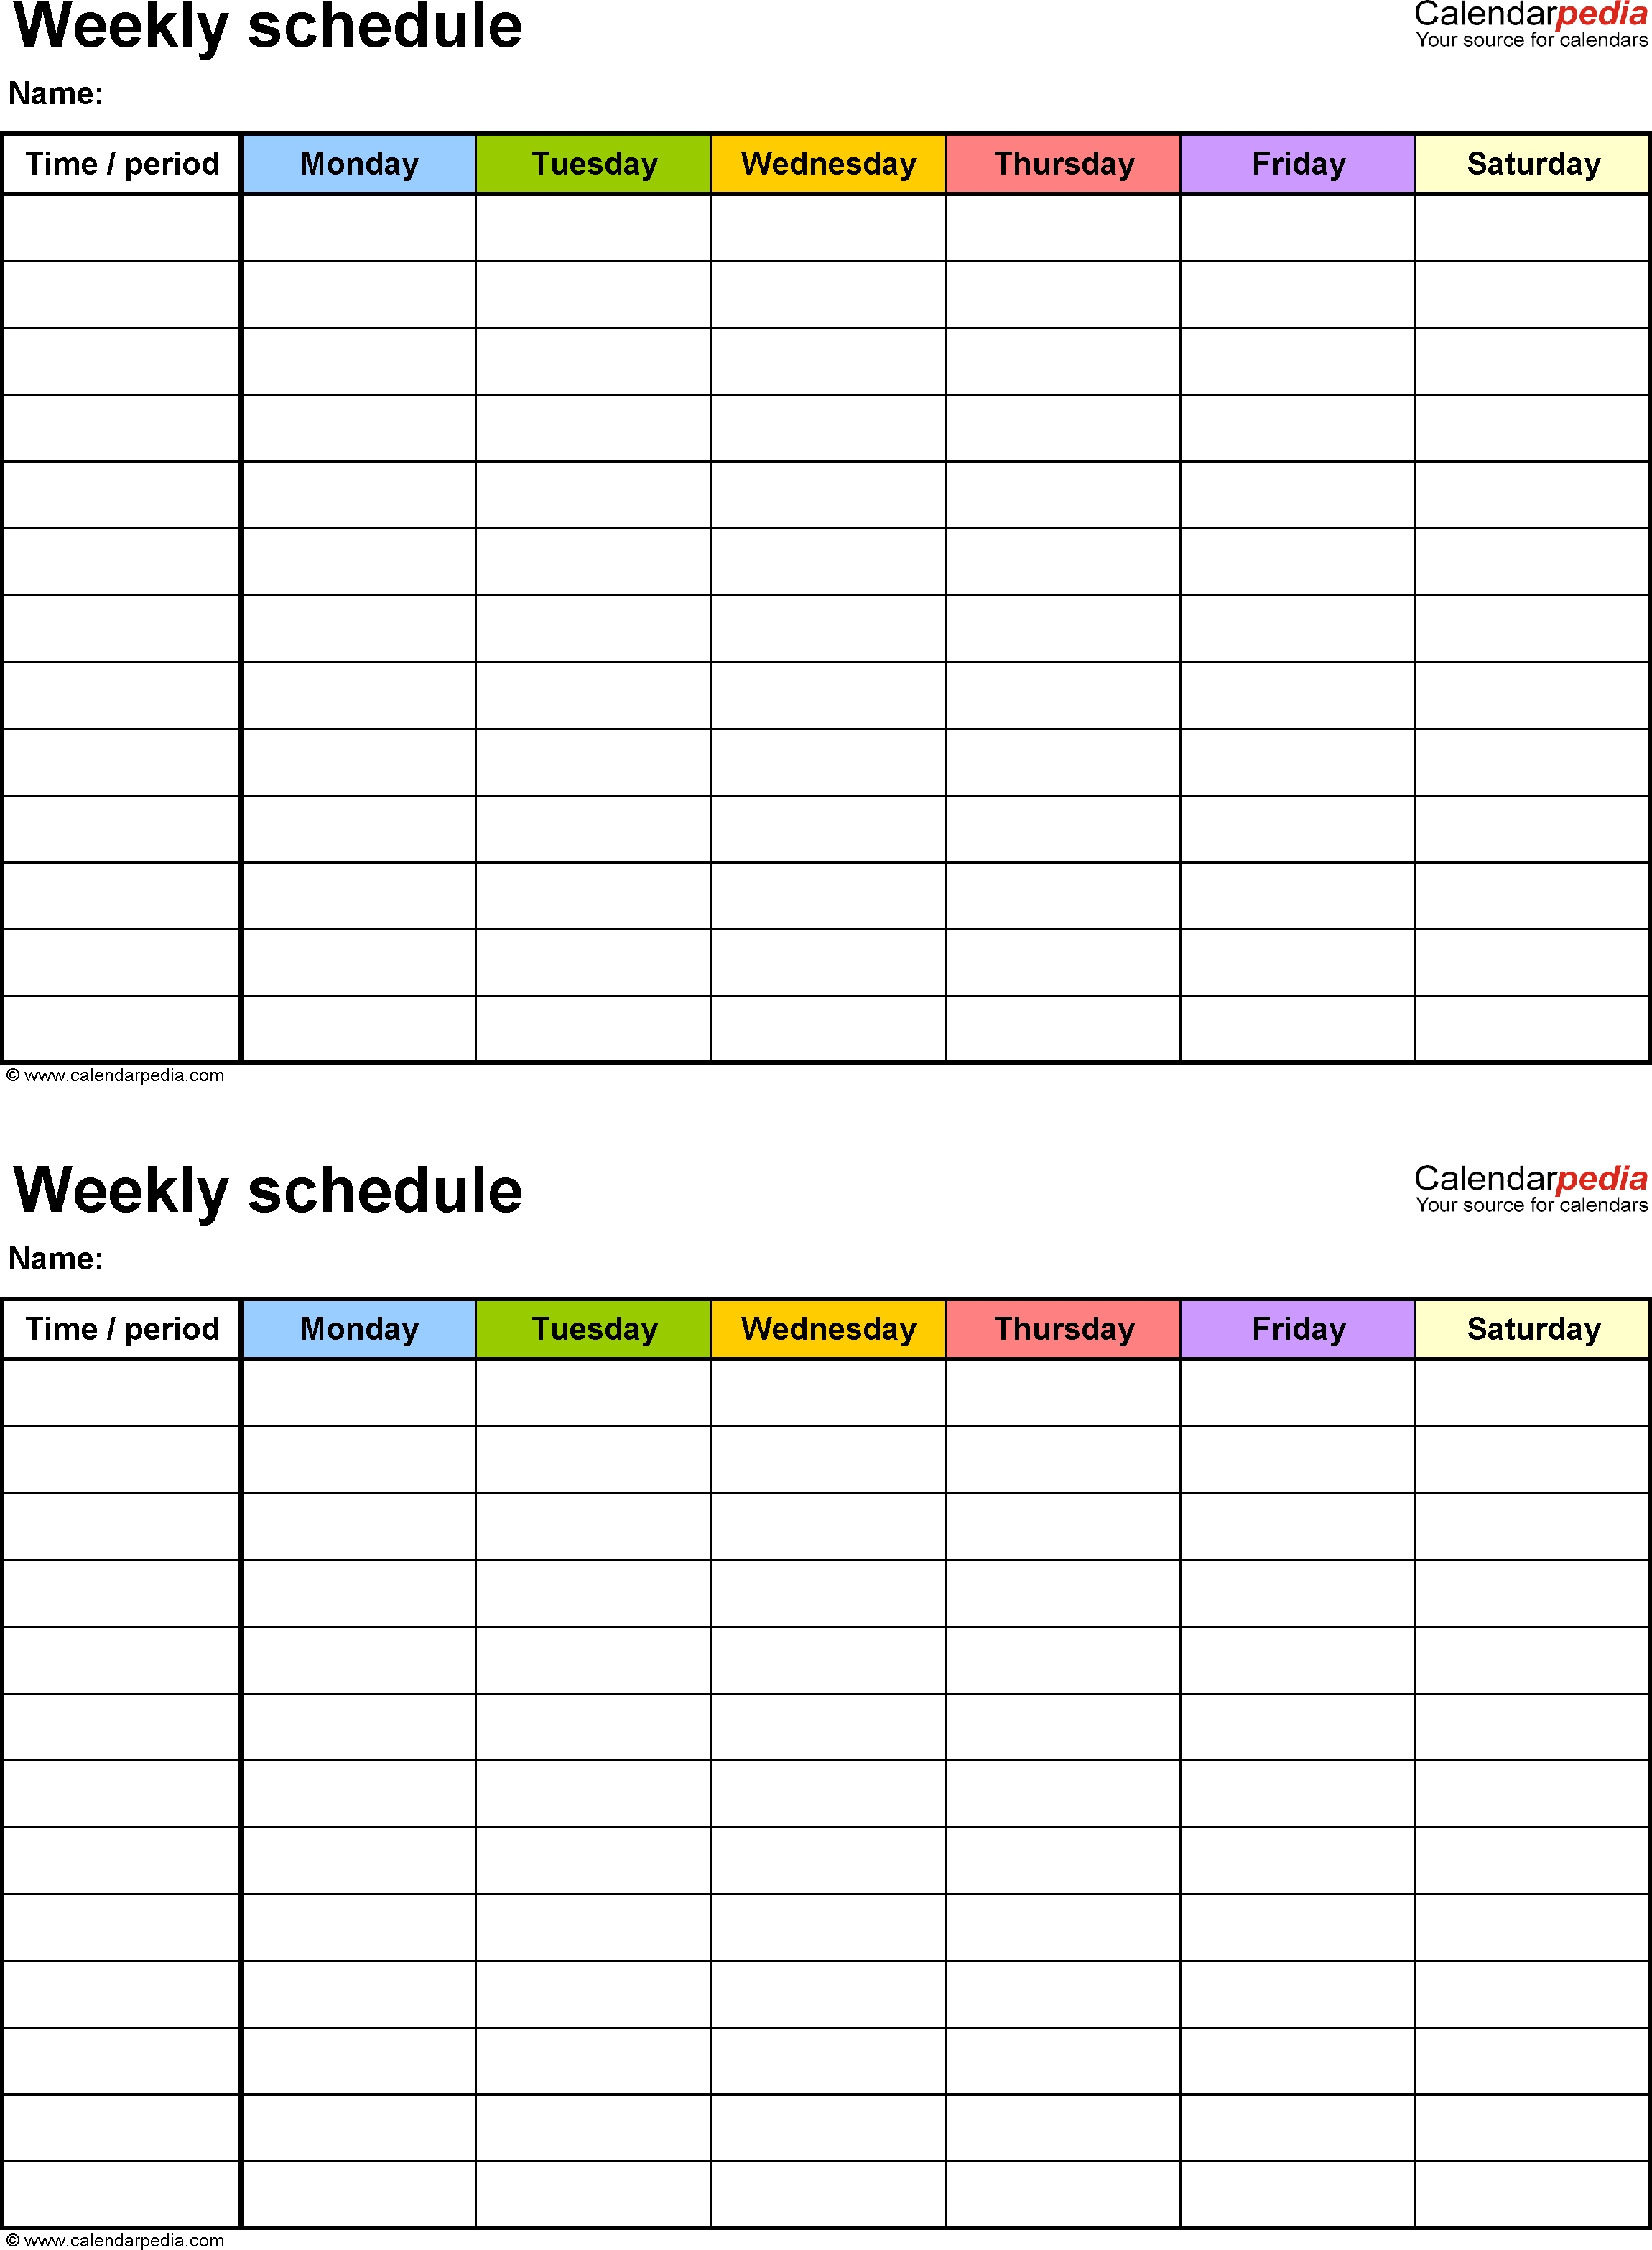 Free Weekly Schedule Templates For Word - 18 Templates with 7 Day Employee Schedule Template